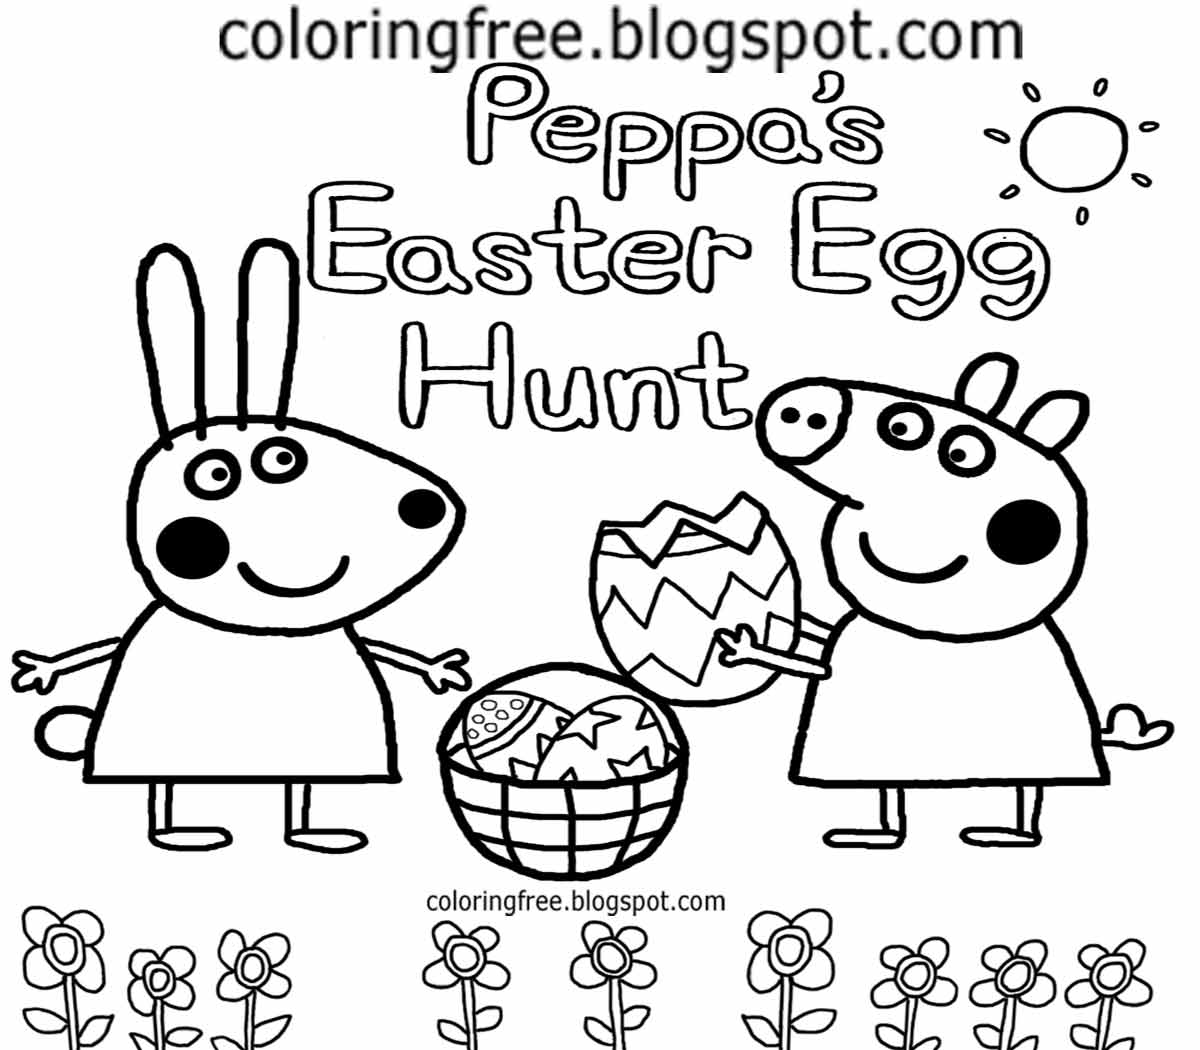 Peppa Pig Rebecca Rabbit Coloring Pages Coloring Pages